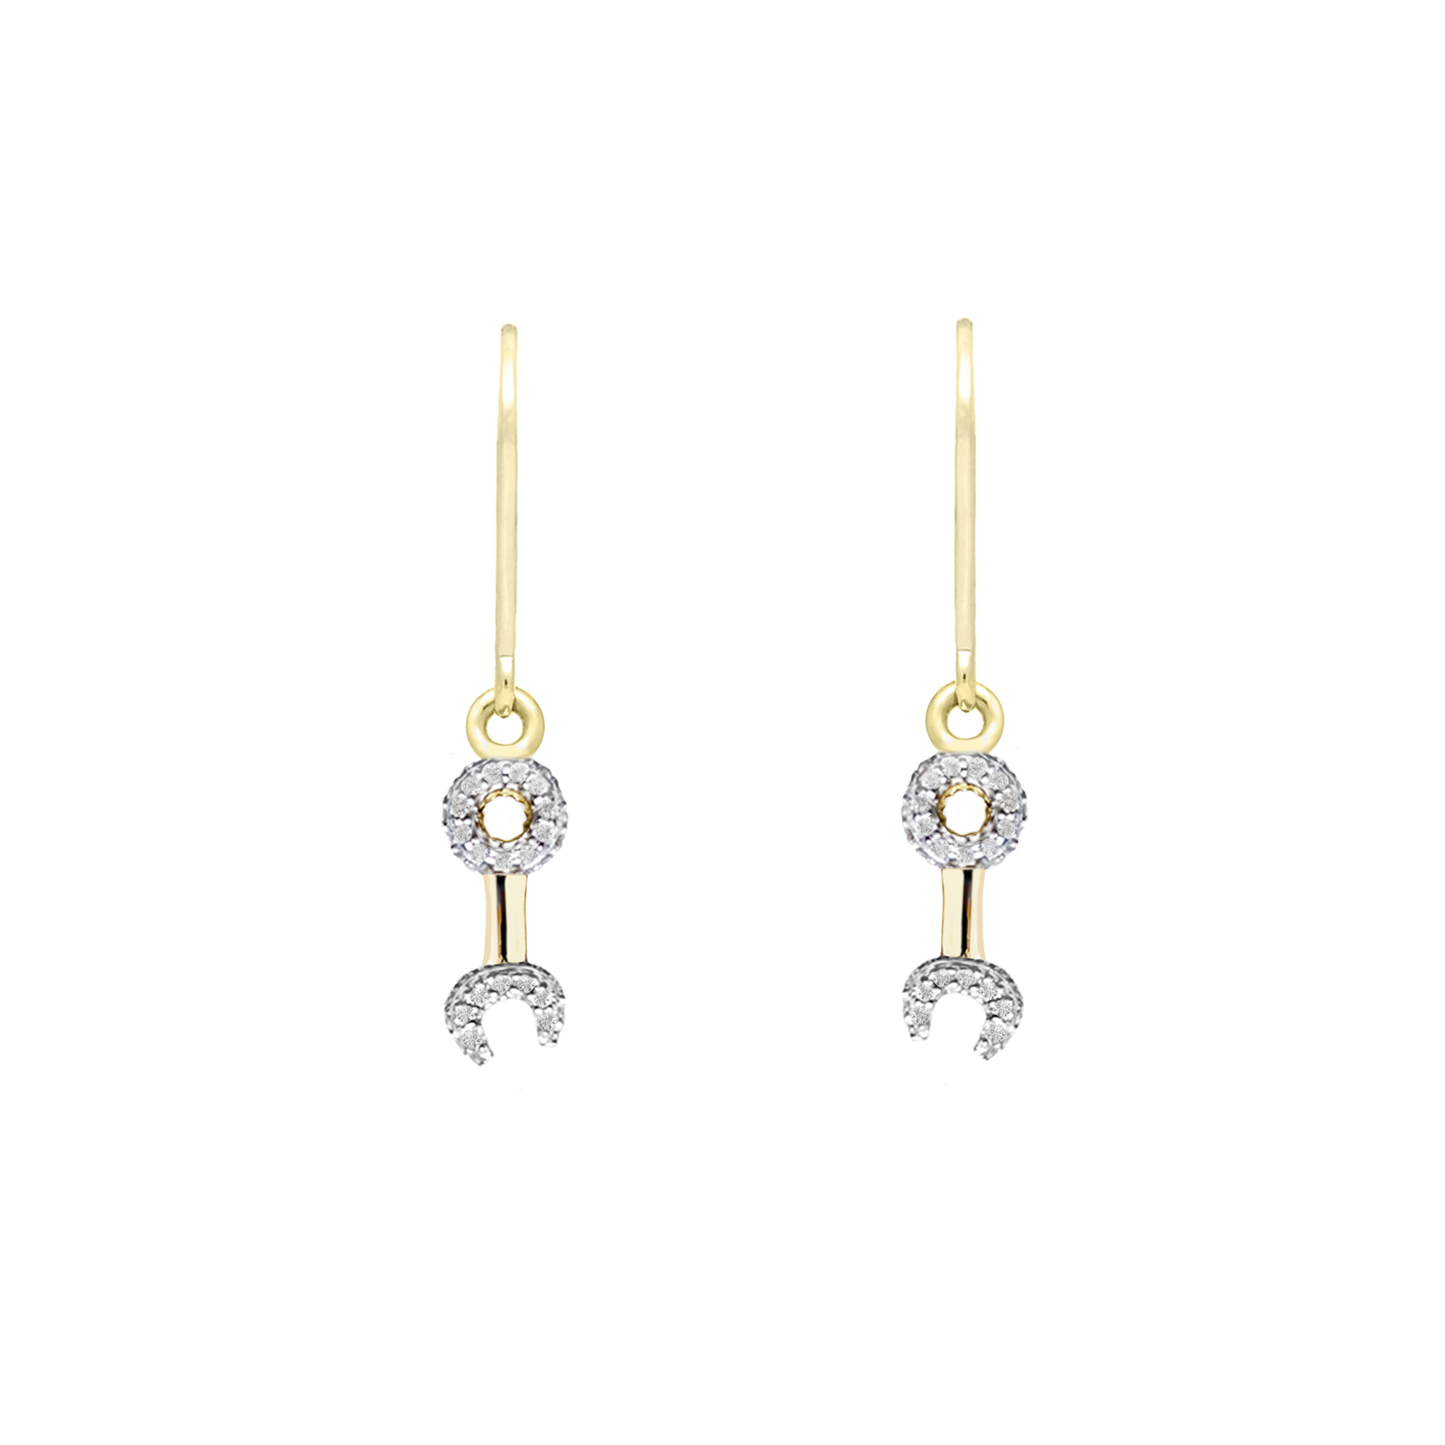 Crank It Up gold-plated Wrench leverback earrings by Pavé The Way® Jewelry